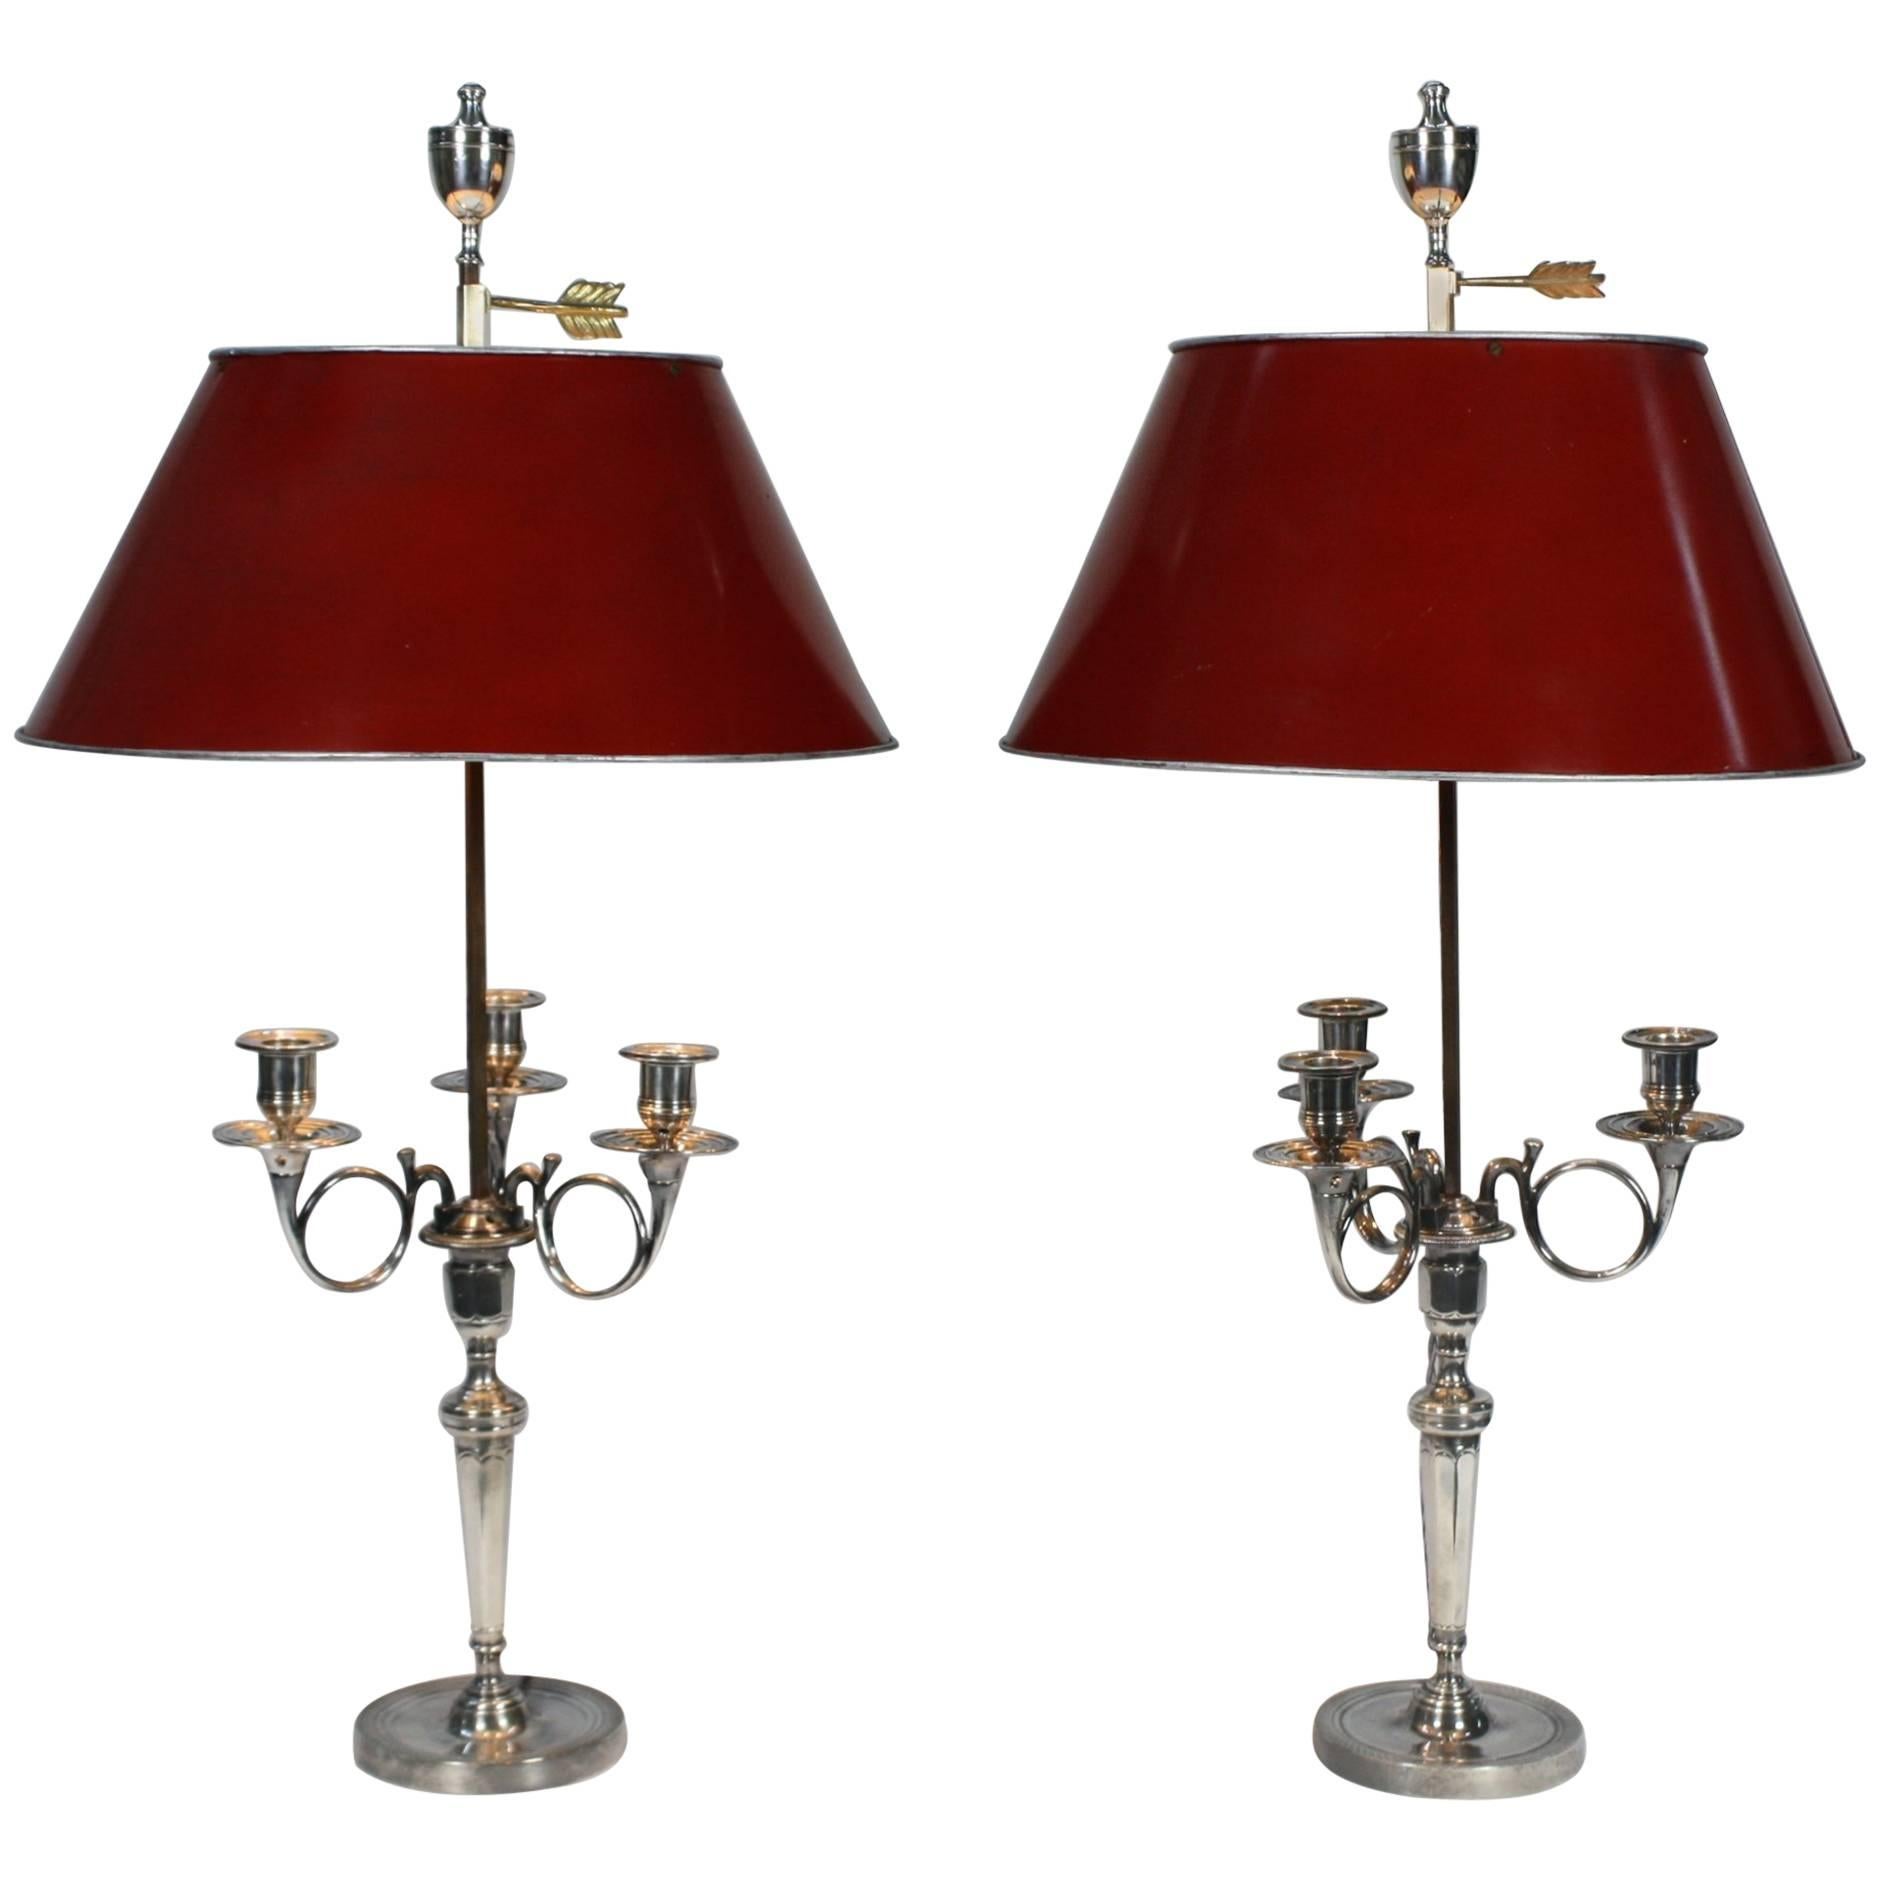 Pair of Silvered-Bronze Hunting Horn Candelabra Lamps